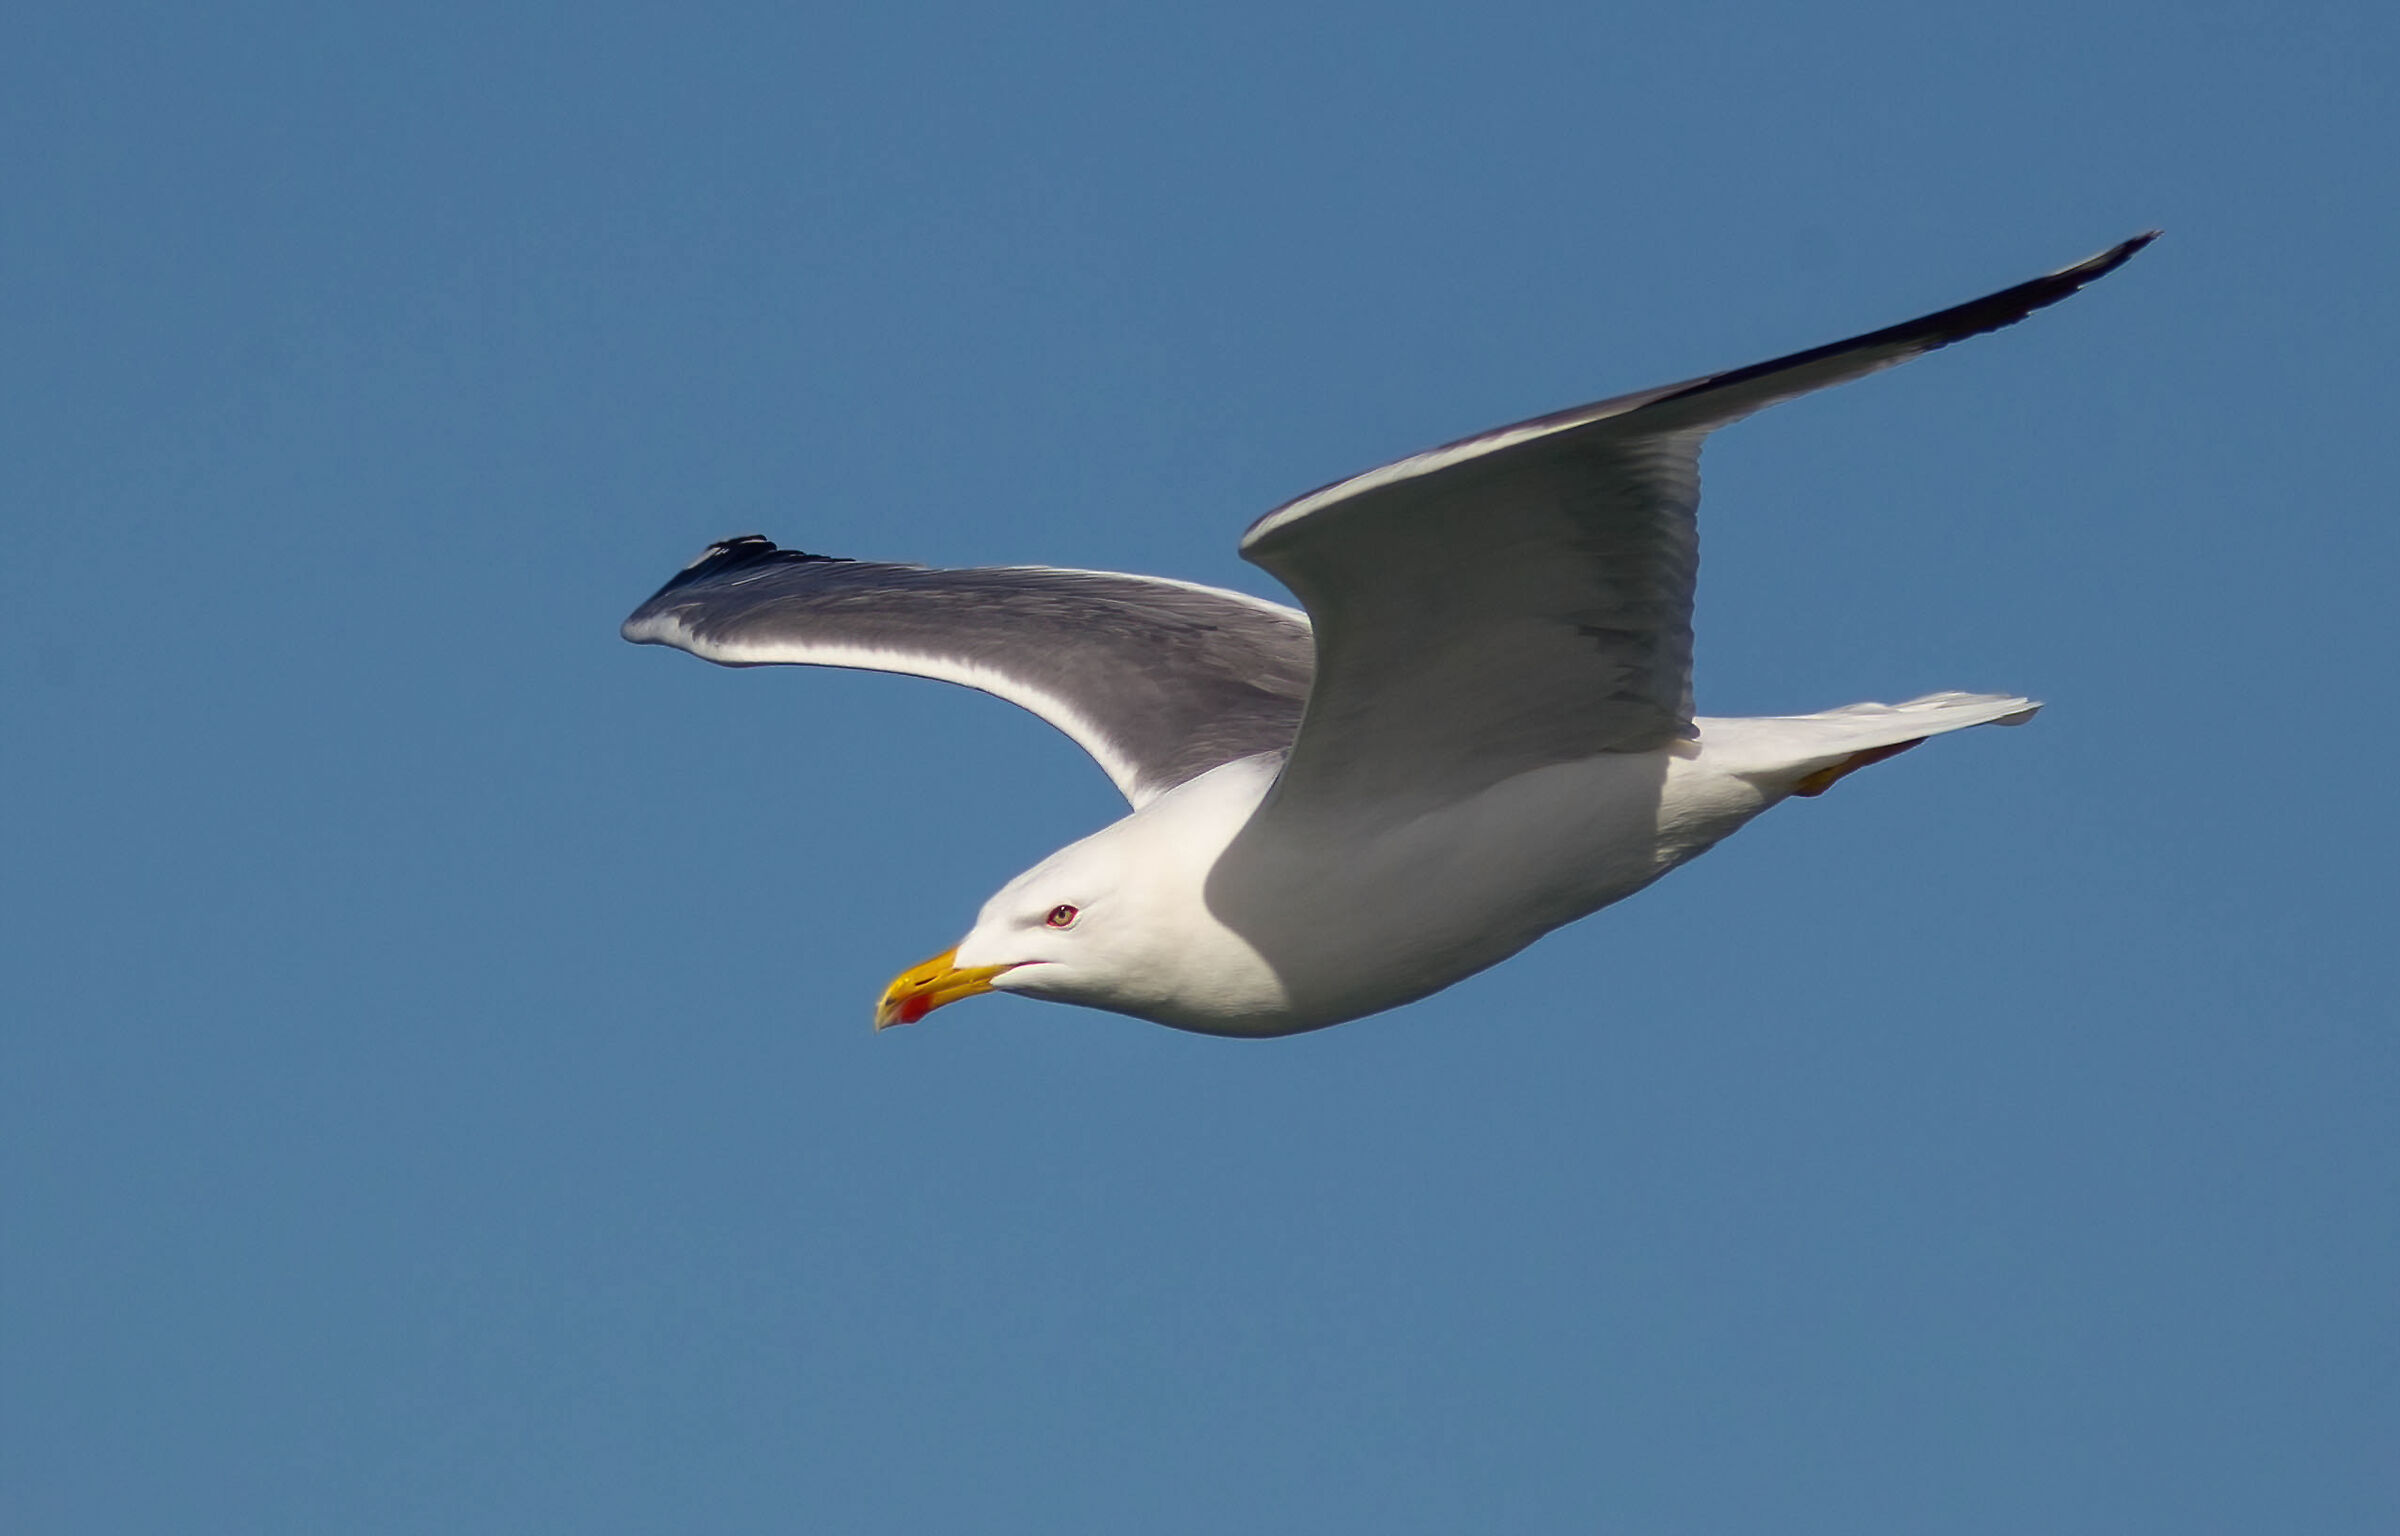 The glide of the seagull...